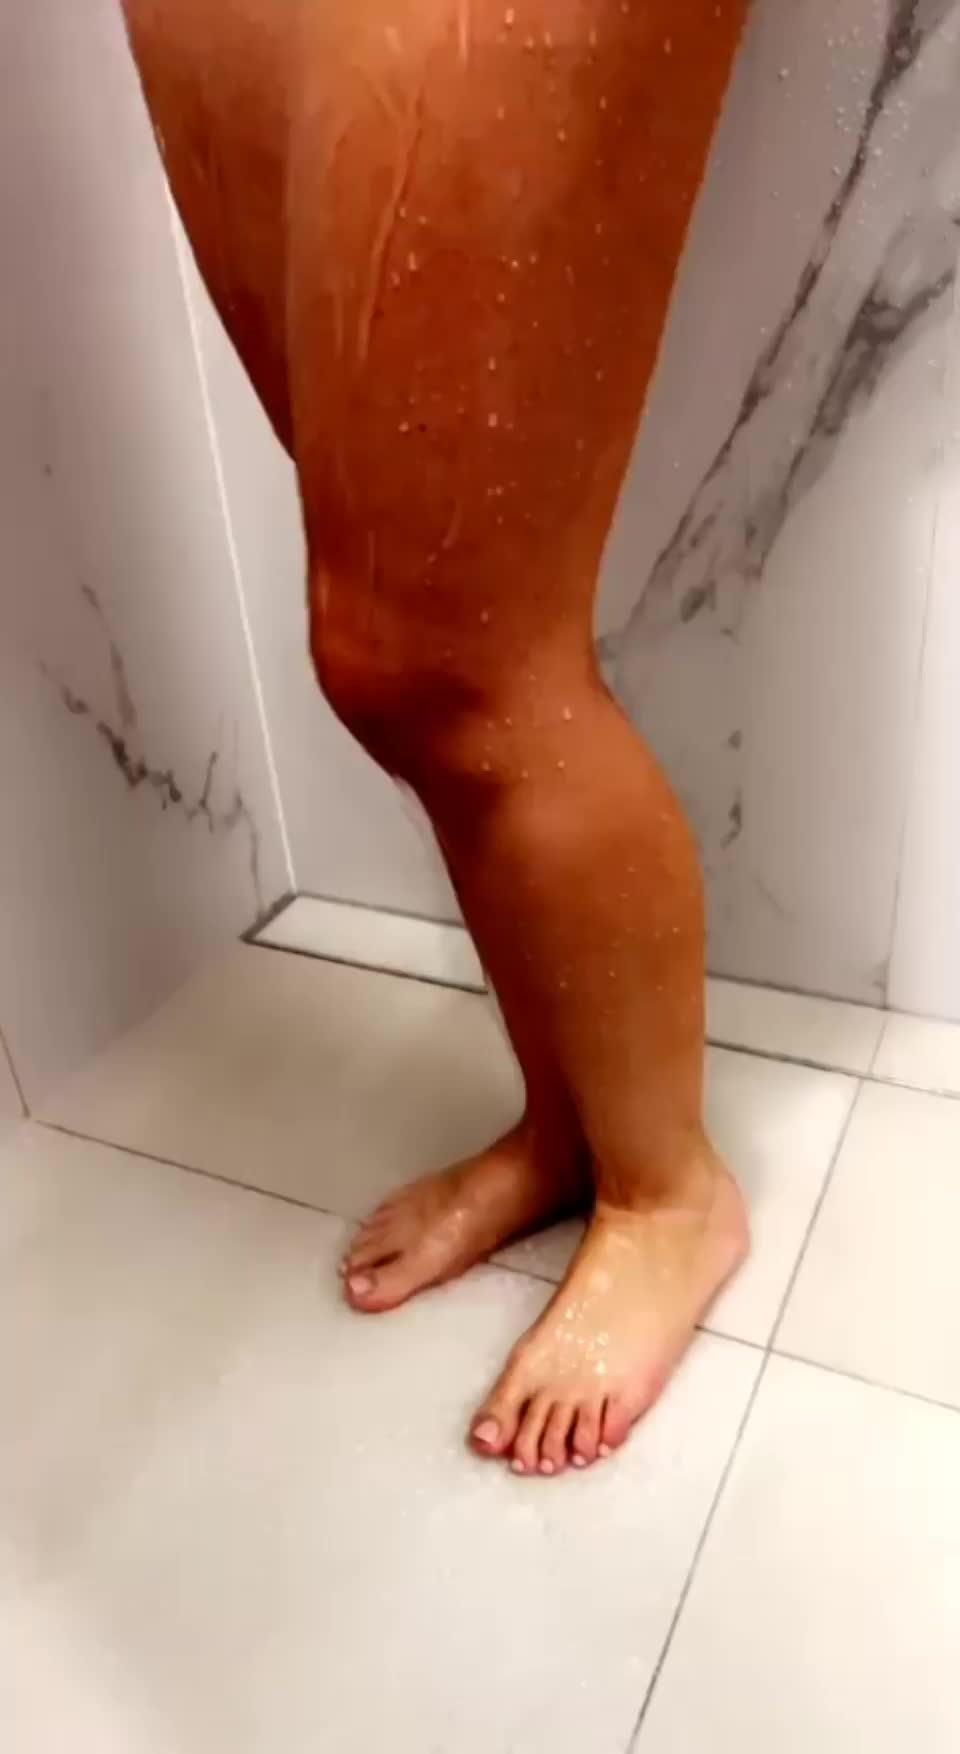 Having a nice and horny shower : video clip